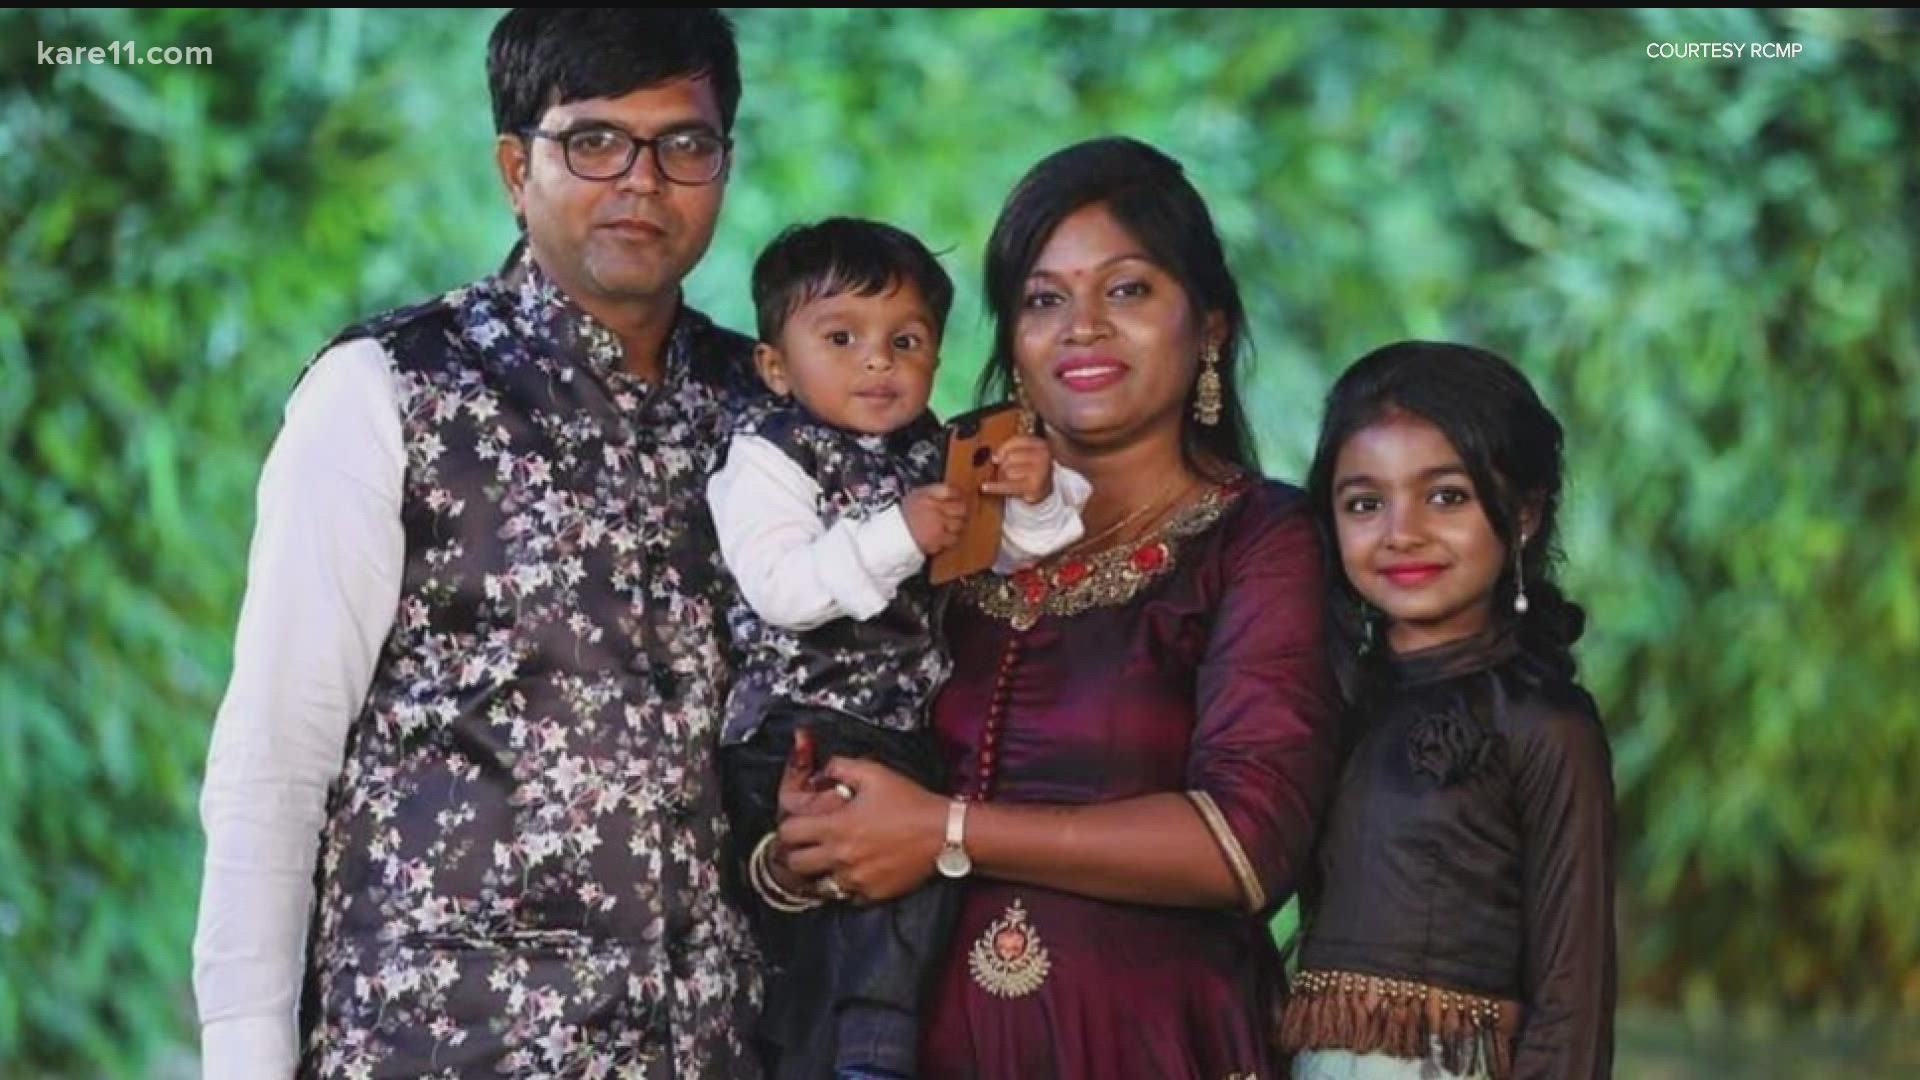 Several thousand natives of Gujarat, a state in western India, call Minnesota home. Many are distraught over a family of four's deaths at the U.S.-Canada border.